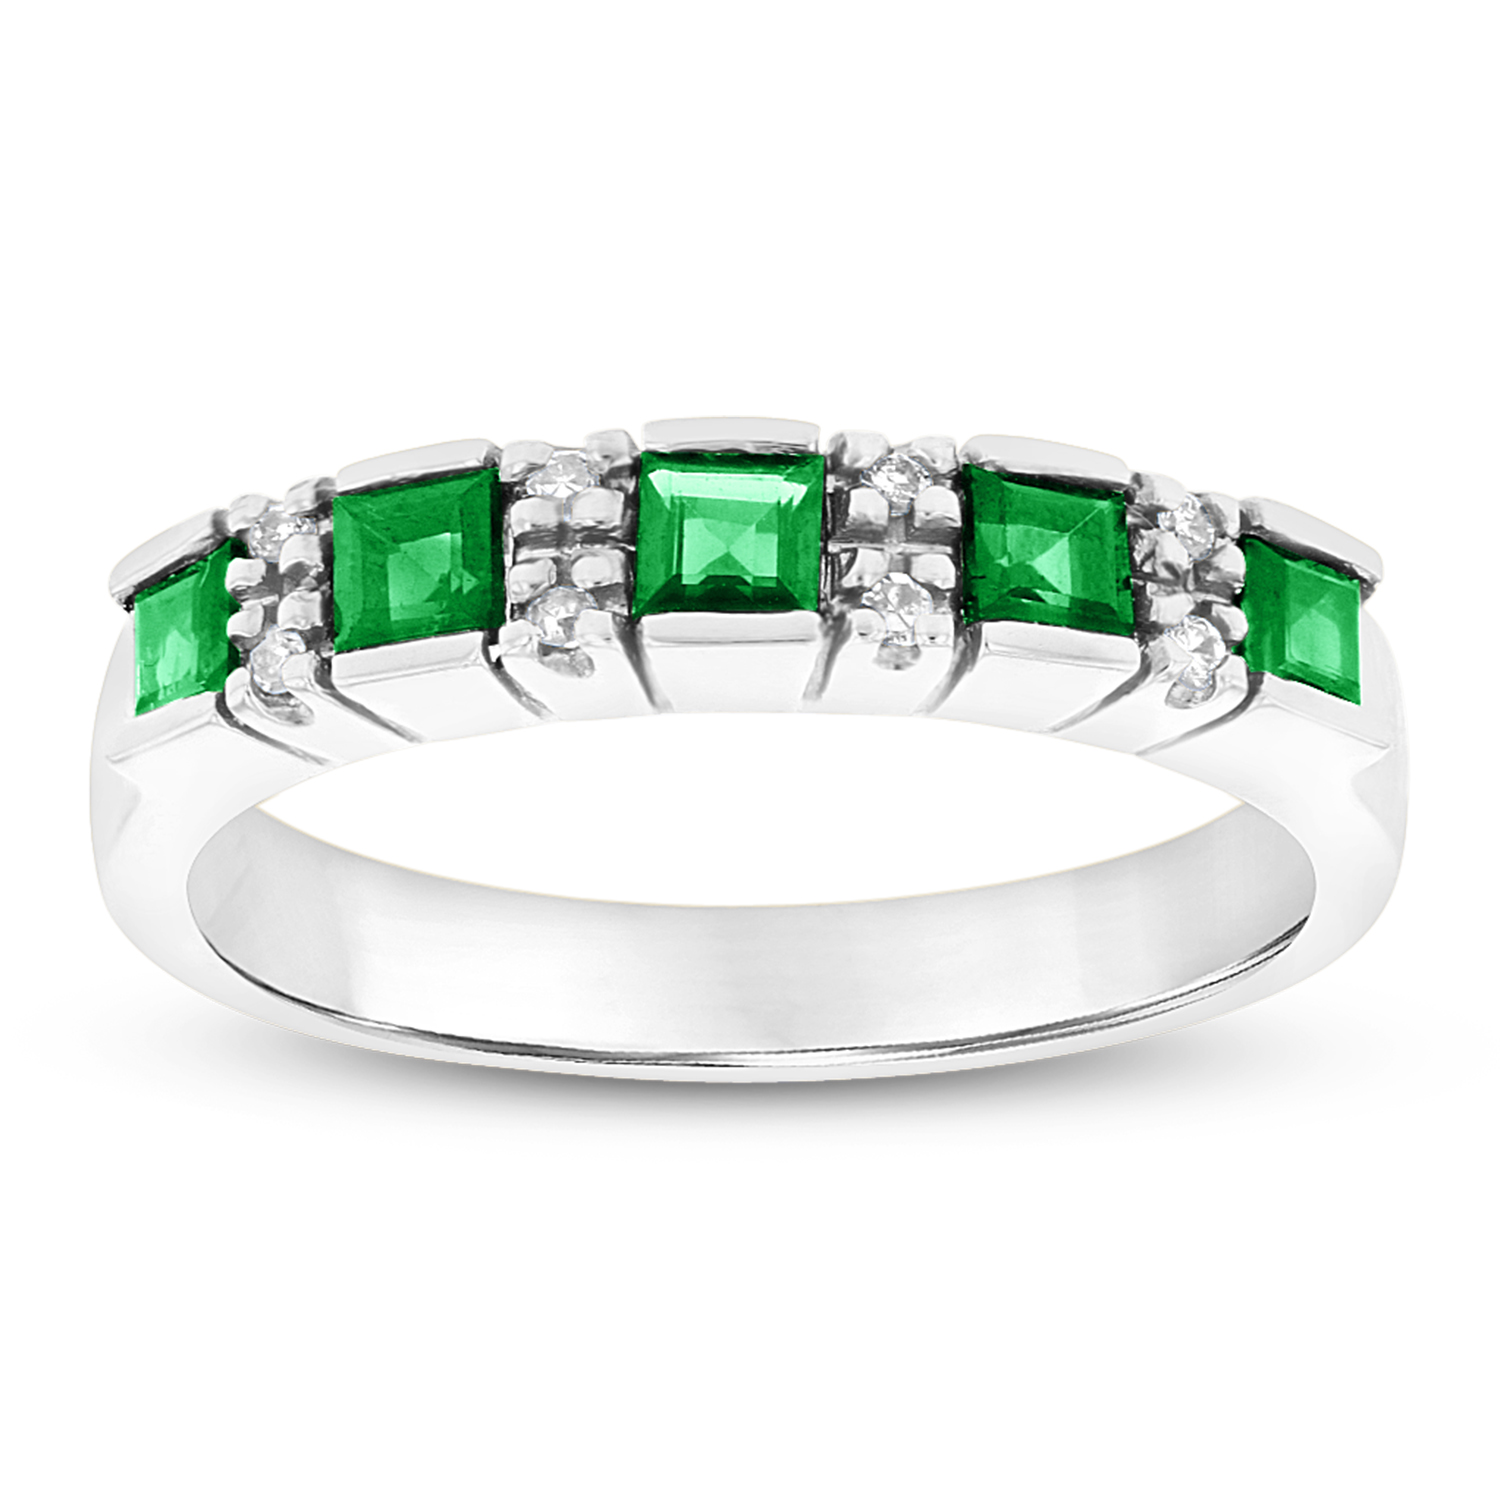 0.05ctw of Diamonds and Emeralds Wedding Band in 14k White Gold